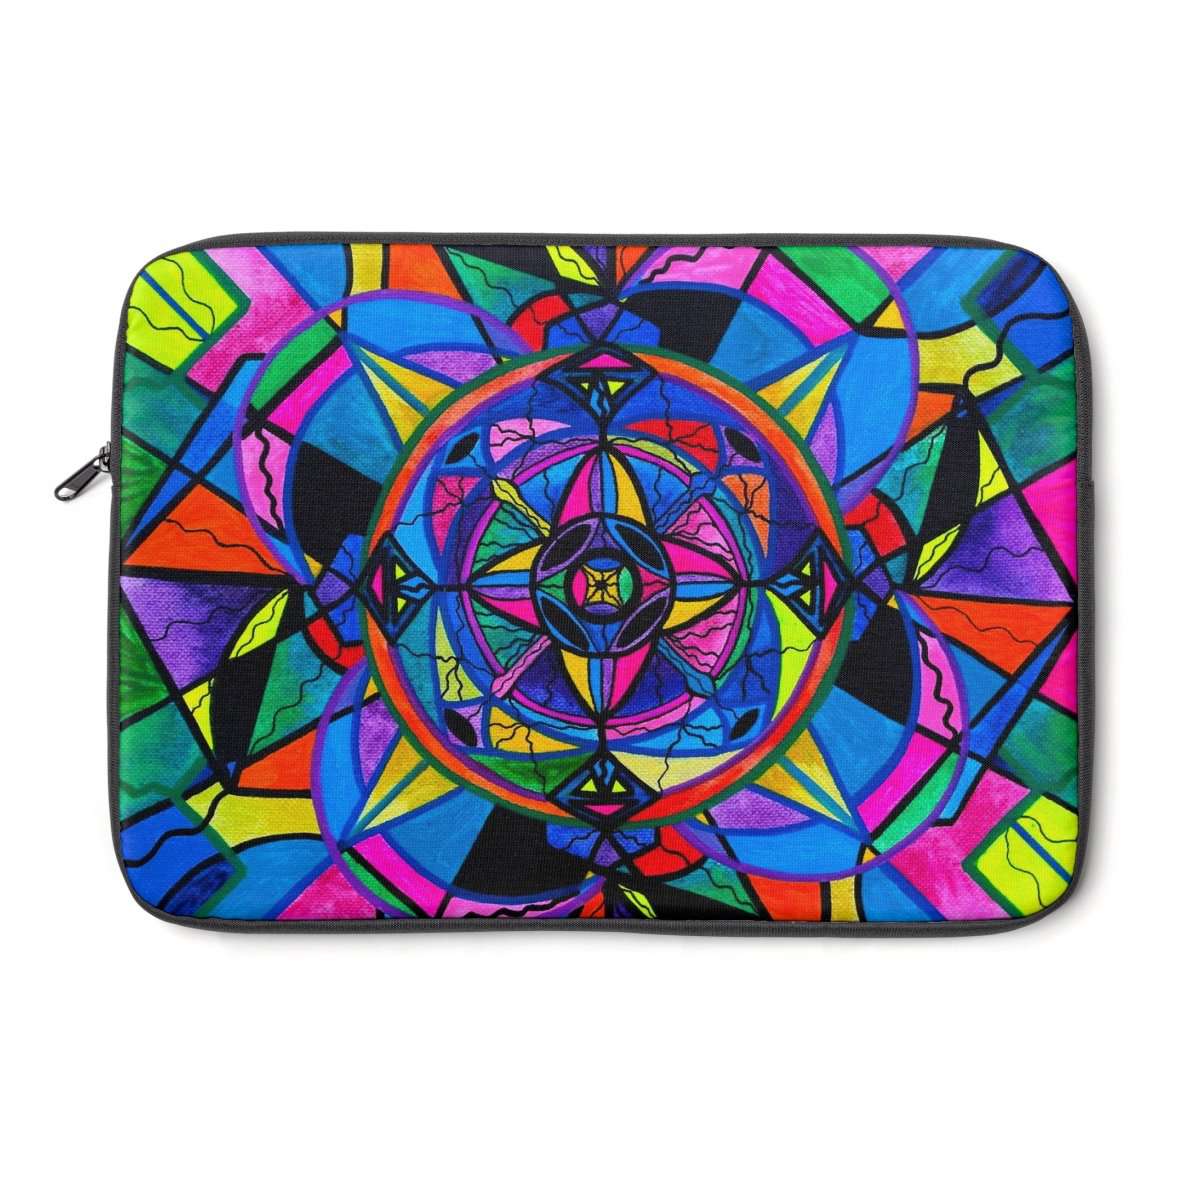 Activating Potential - Laptop Sleeve